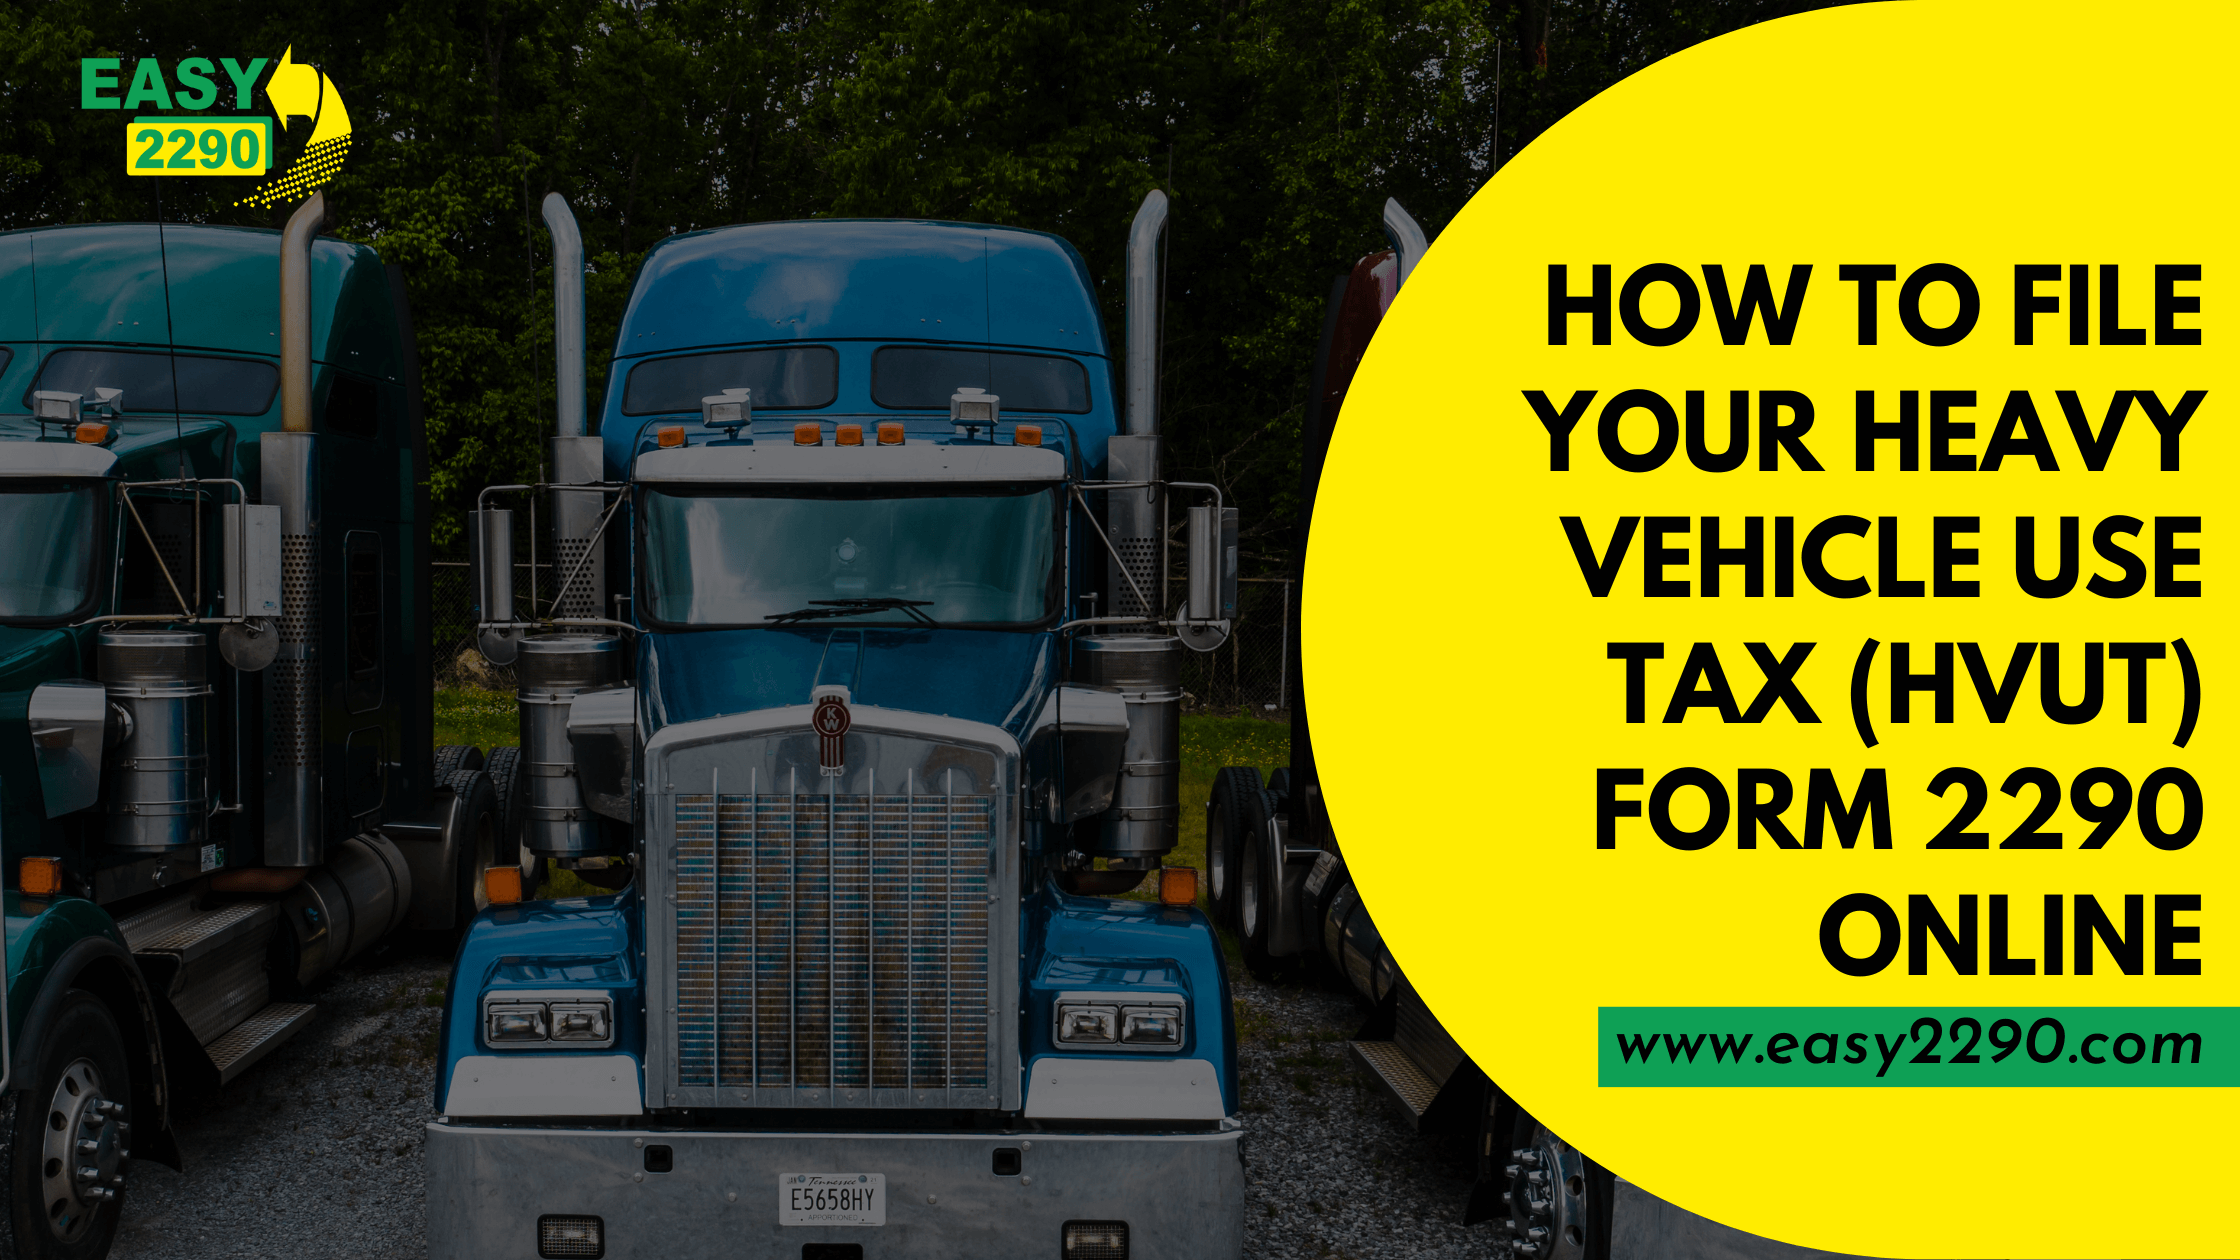 How to File Your Heavy Vehicle Use Tax (HVUT) Form 2290 Online